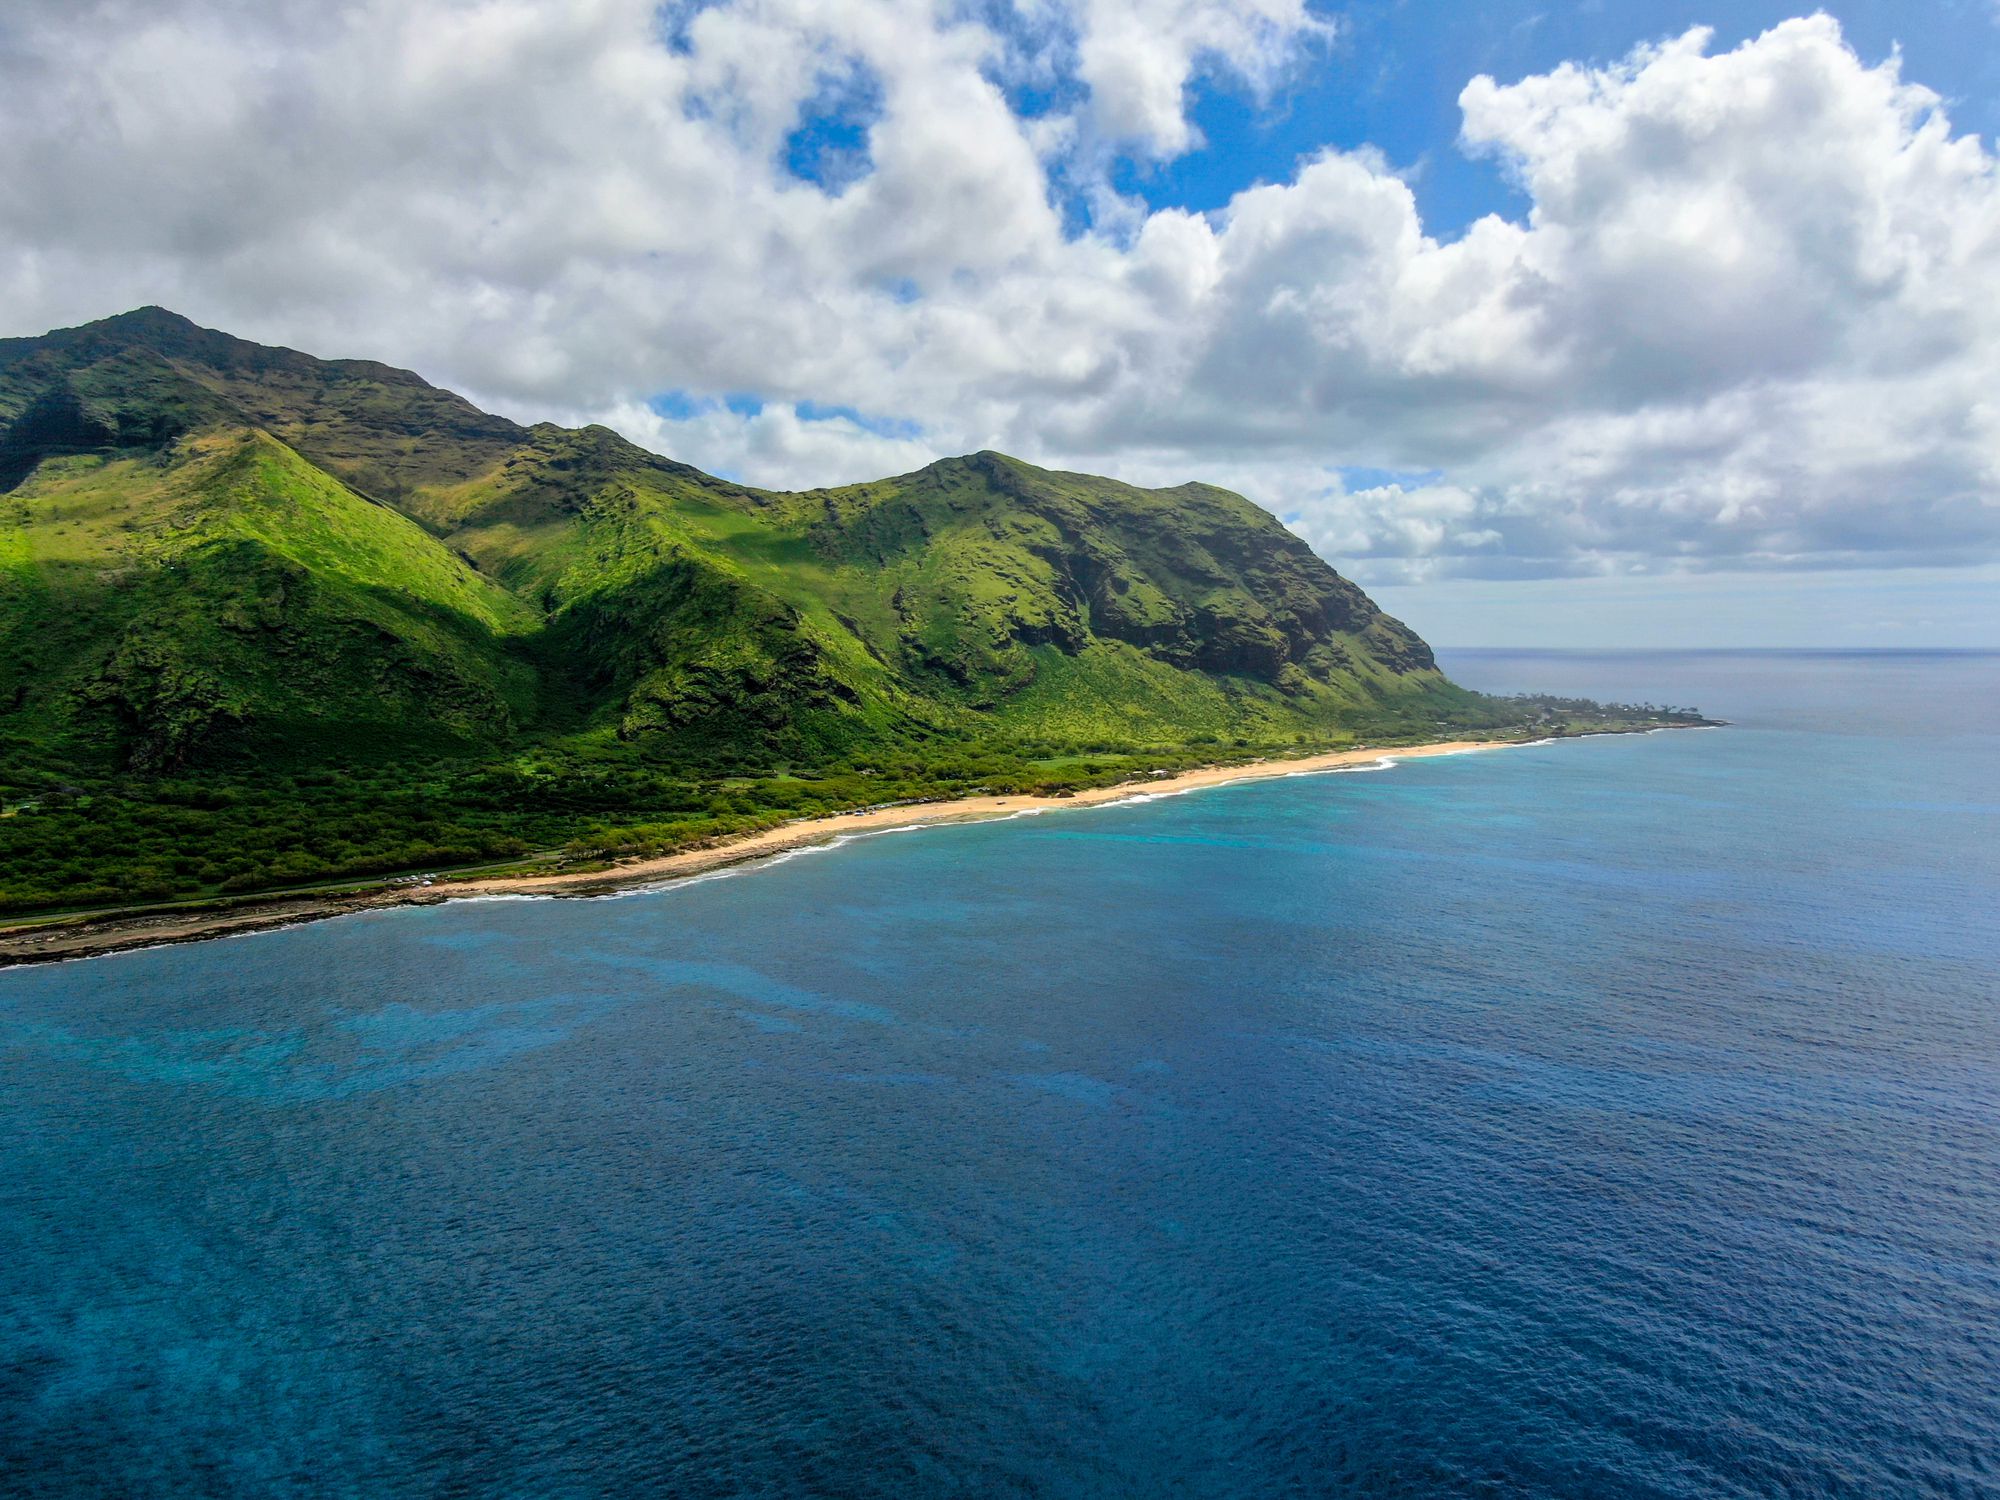 <p>Tucked away on the west coast of Oahu, Waianae offers a wealth of outdoor activities, including hikes in the Waianae Mountain Range, access to numerous nearby beaches, such as Pokai Bay Beach Park, and the weekly Waianae Farmers’ Market.</p><ul><li>Population: 13,614</li><li>Median Household Income: $71,681</li><li>Cost of Living: 128% of the U.S. average</li><li>Median Rent Price: $2,100</li><li>Home Price-to-Income Ratio: 8.2</li><li>Average Property Tax: 0.32%</li></ul><p class="padding-top-ms u-margin-bottom-ms"><b>Housing Affordability: </b>The median rental price in Waianae is $2,100, which has fallen $100 year-over-year. The town is a 44-minute drive from Honolulu where median rents are $2,700. The average home value here is trending close to $600,000.</p>